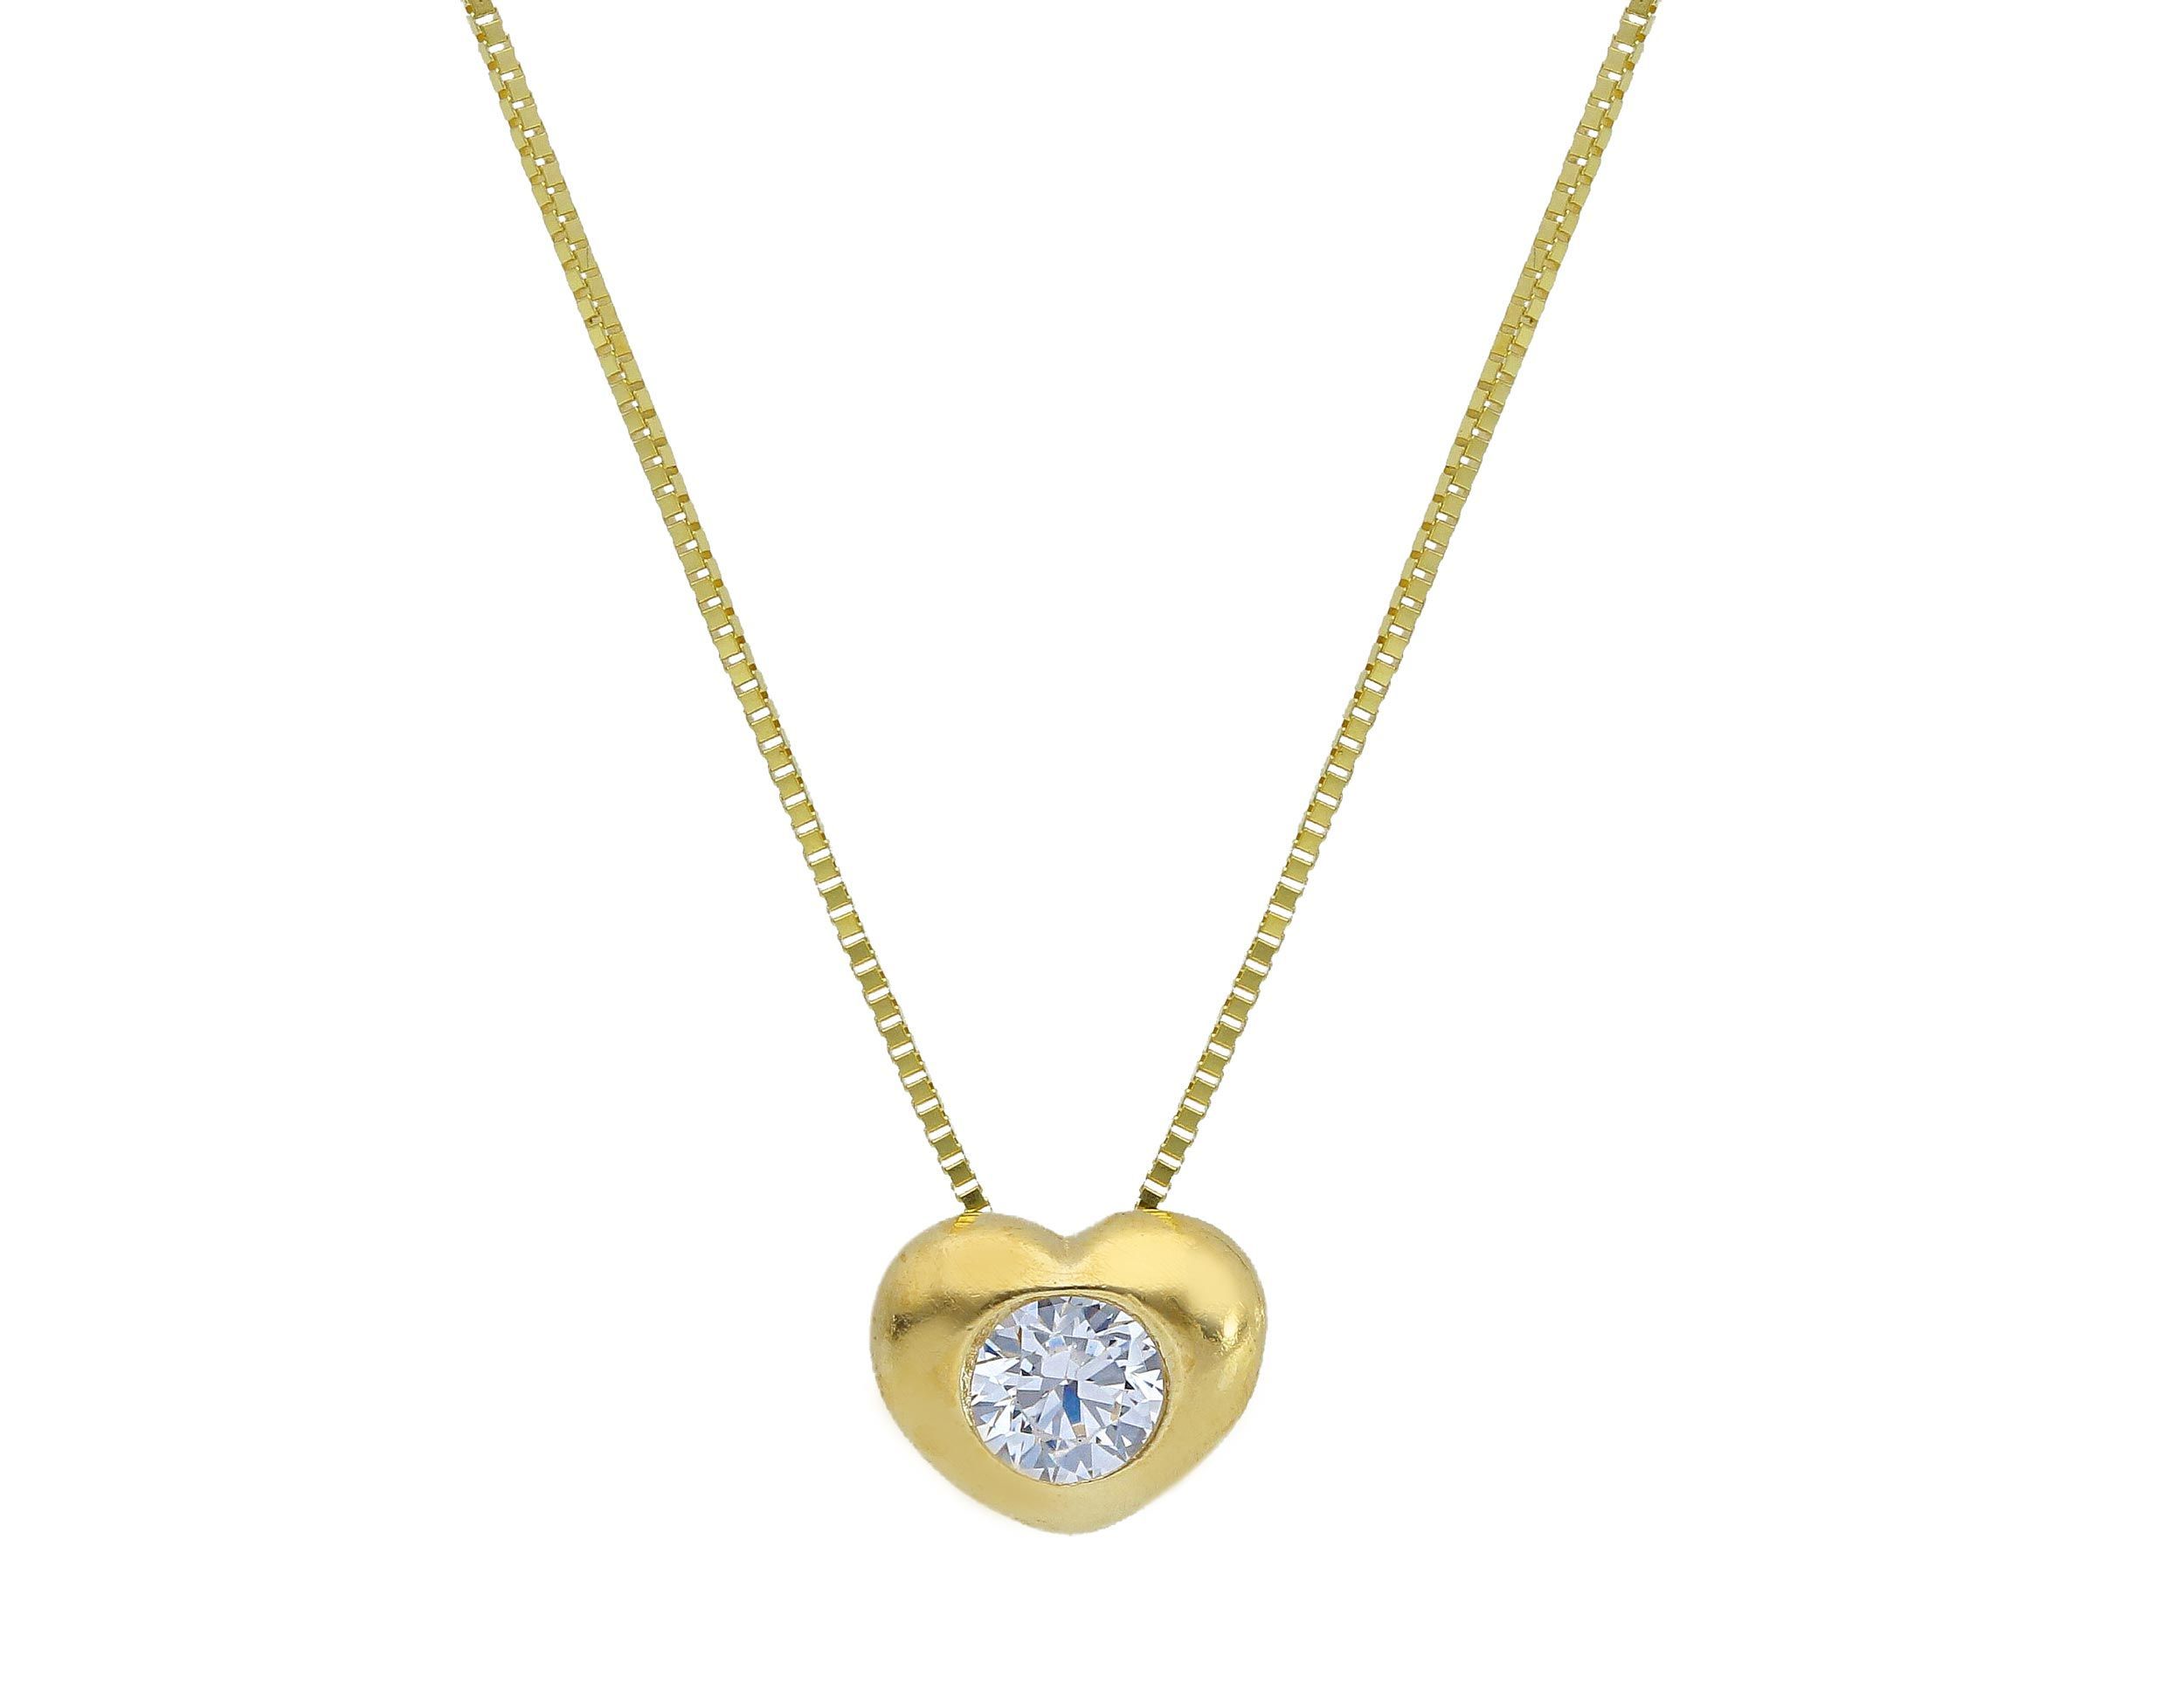 Goden necklace k9 with white zircon (code S173896)